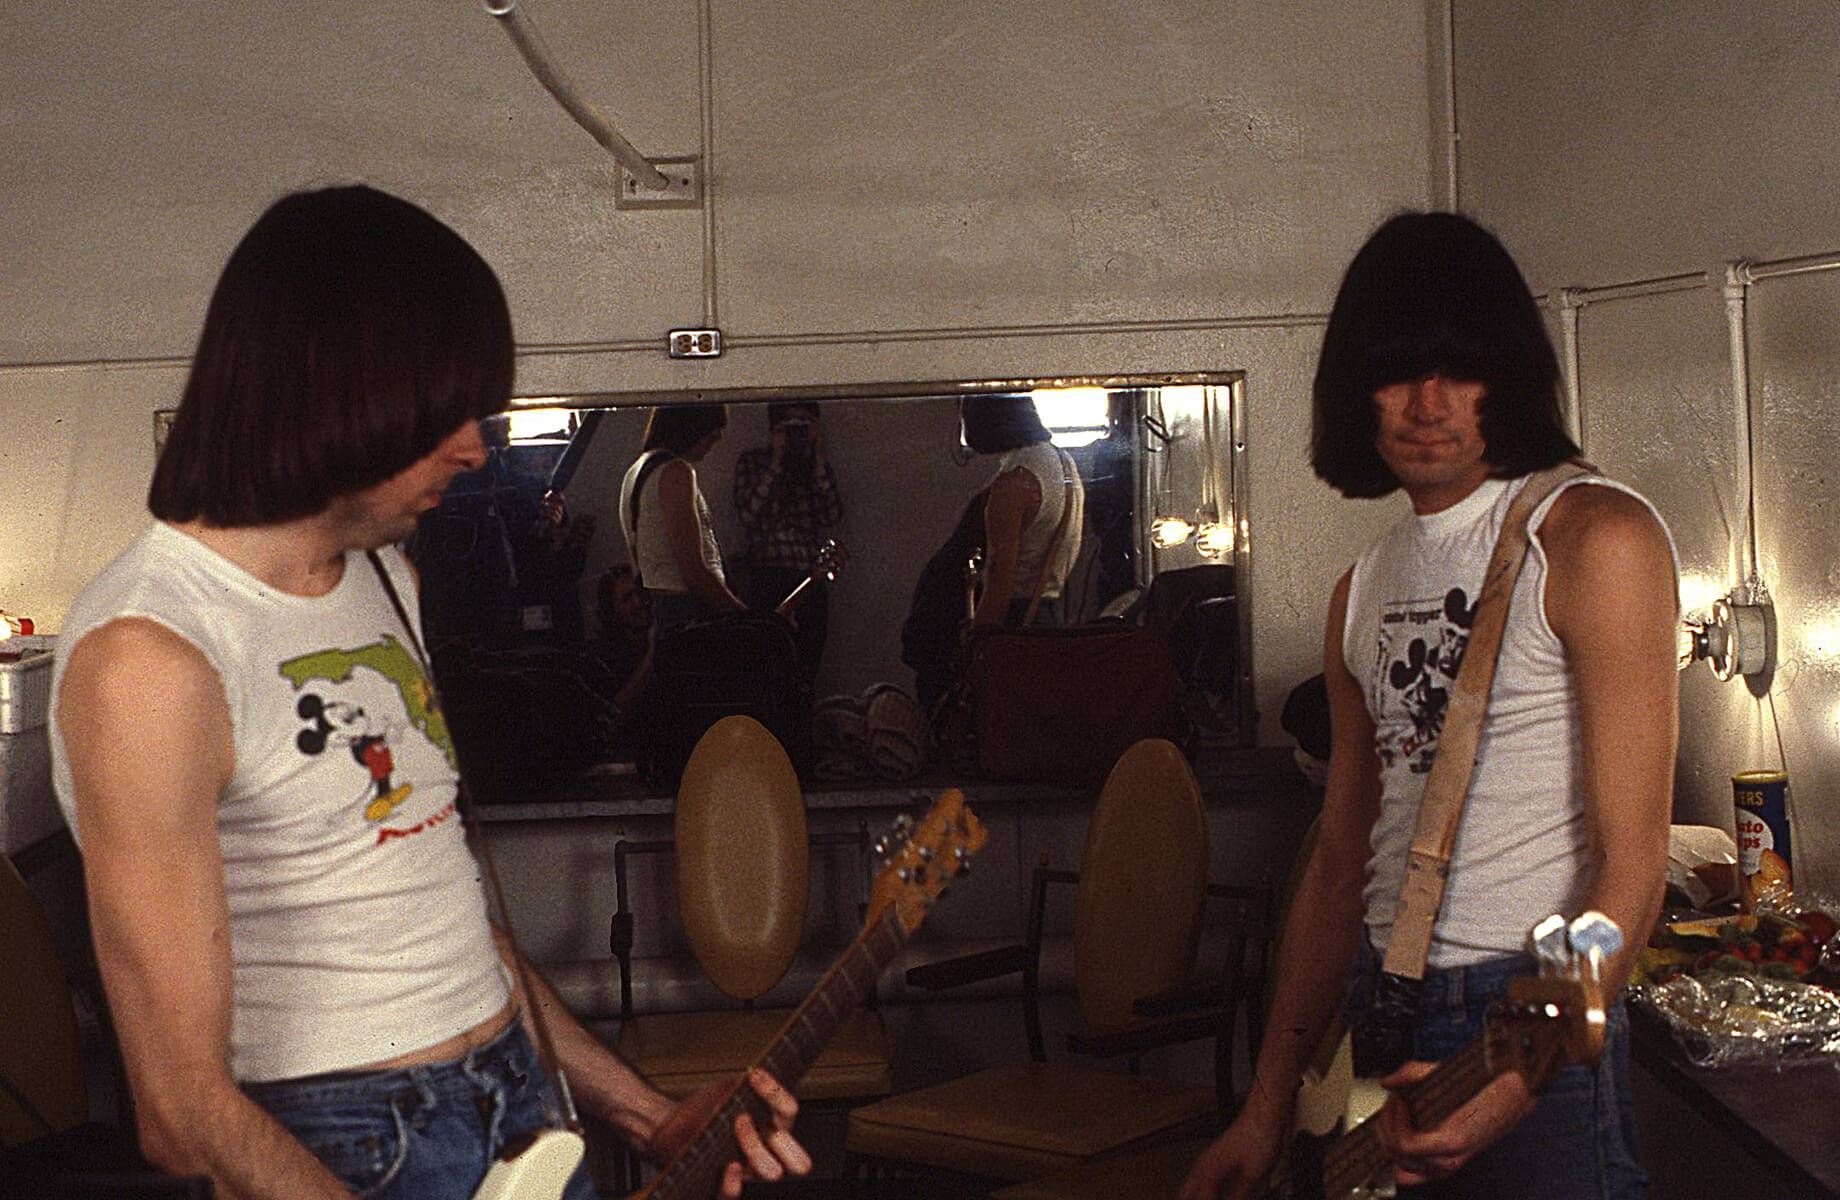 The Ramones rehearsing backstage at the State theater.